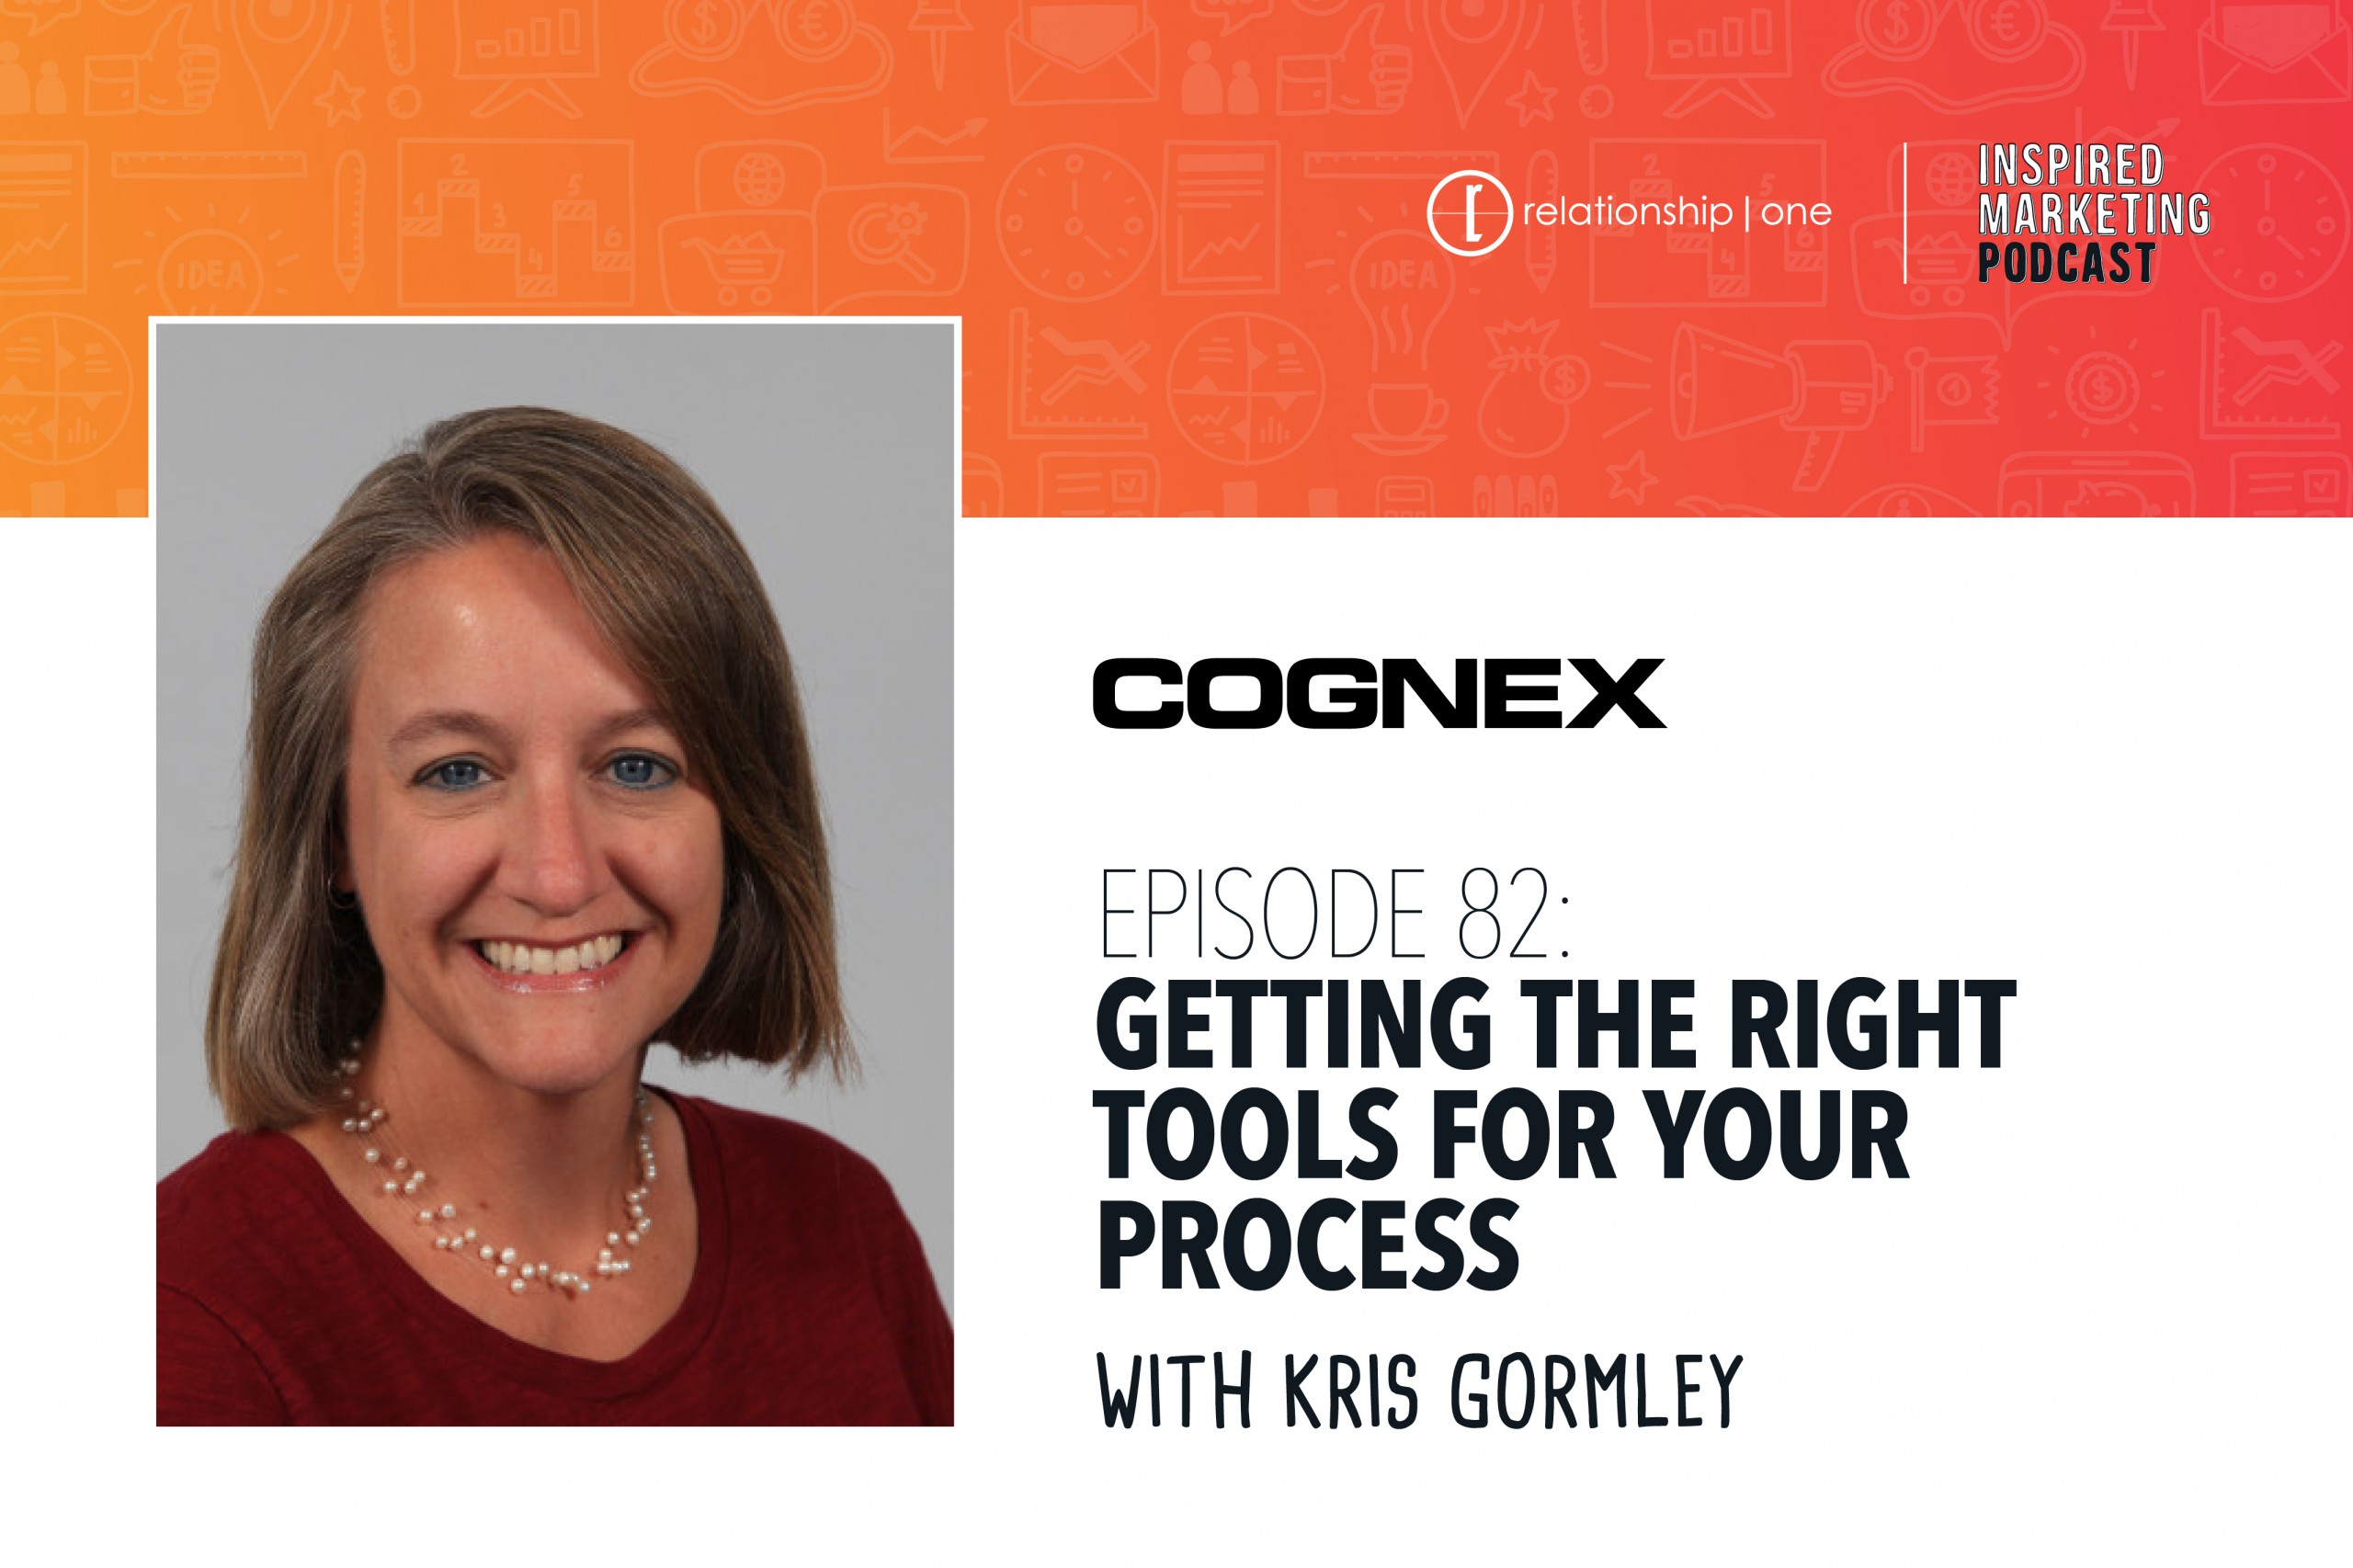 Inspired Marketing: Cognex’s Kris Gormley on Getting The Right Tools For Your Process